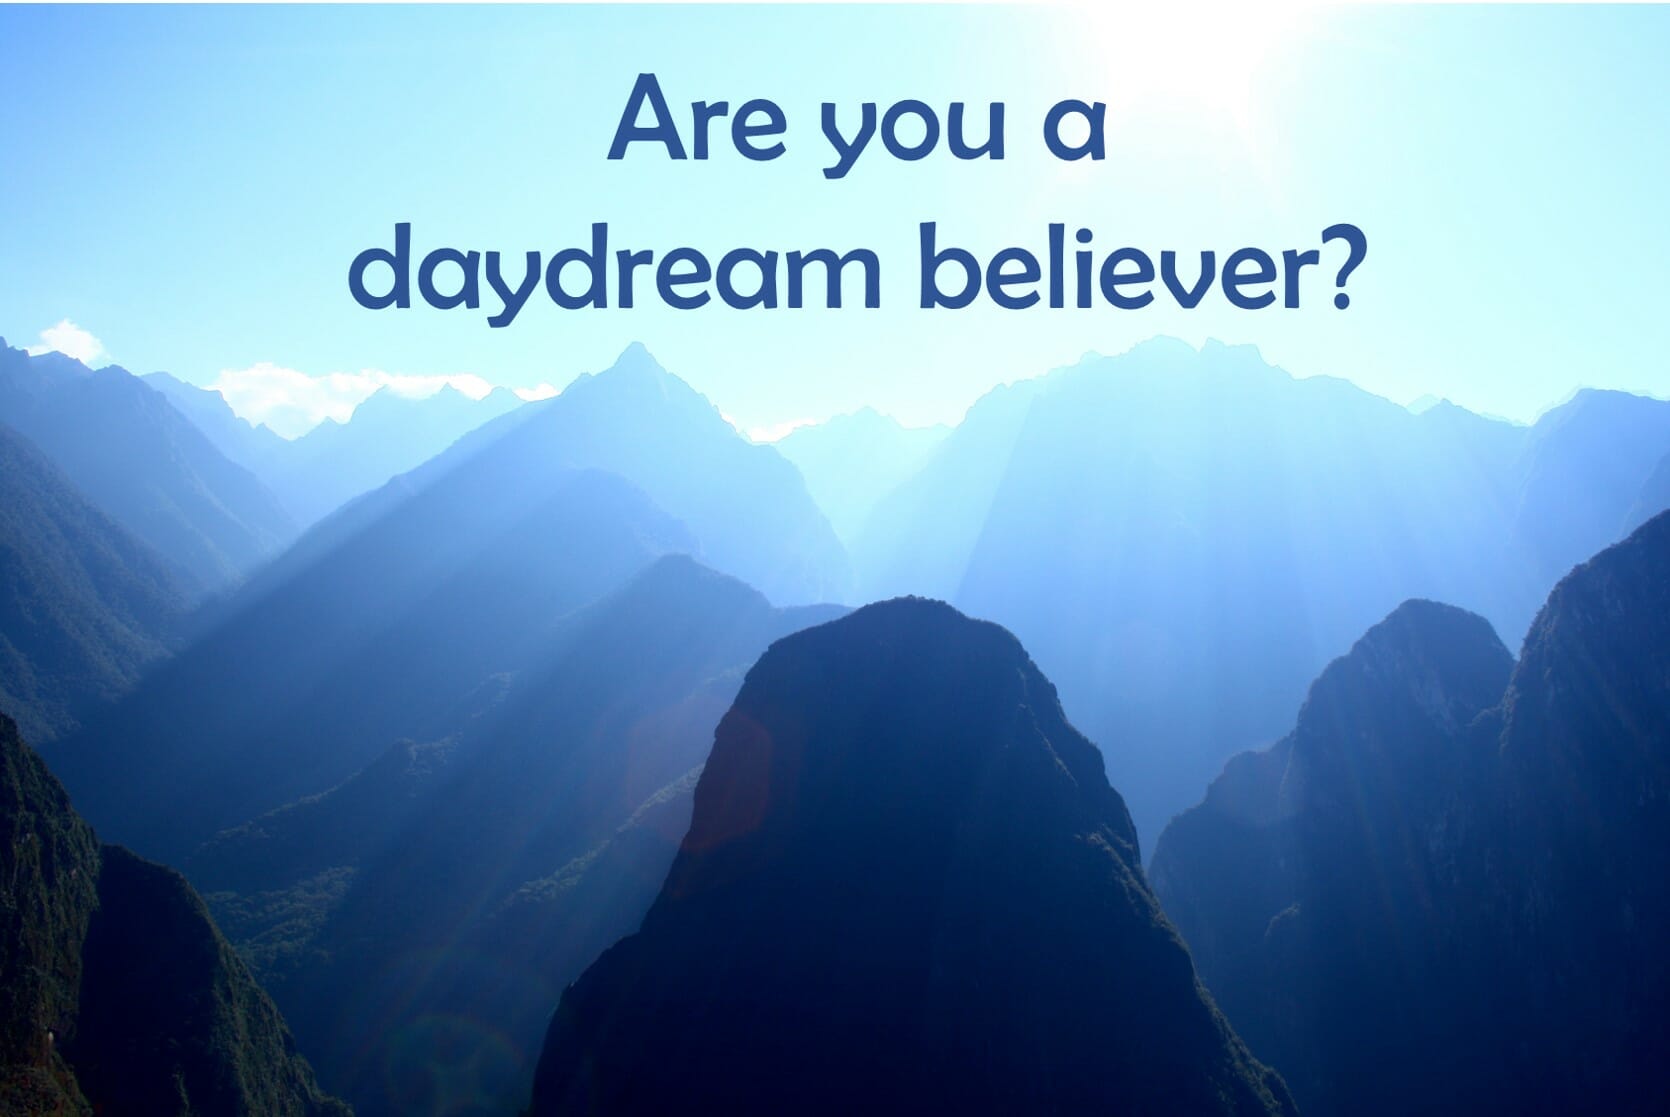 ARE YOU A DAYDREAM BELIEVER?